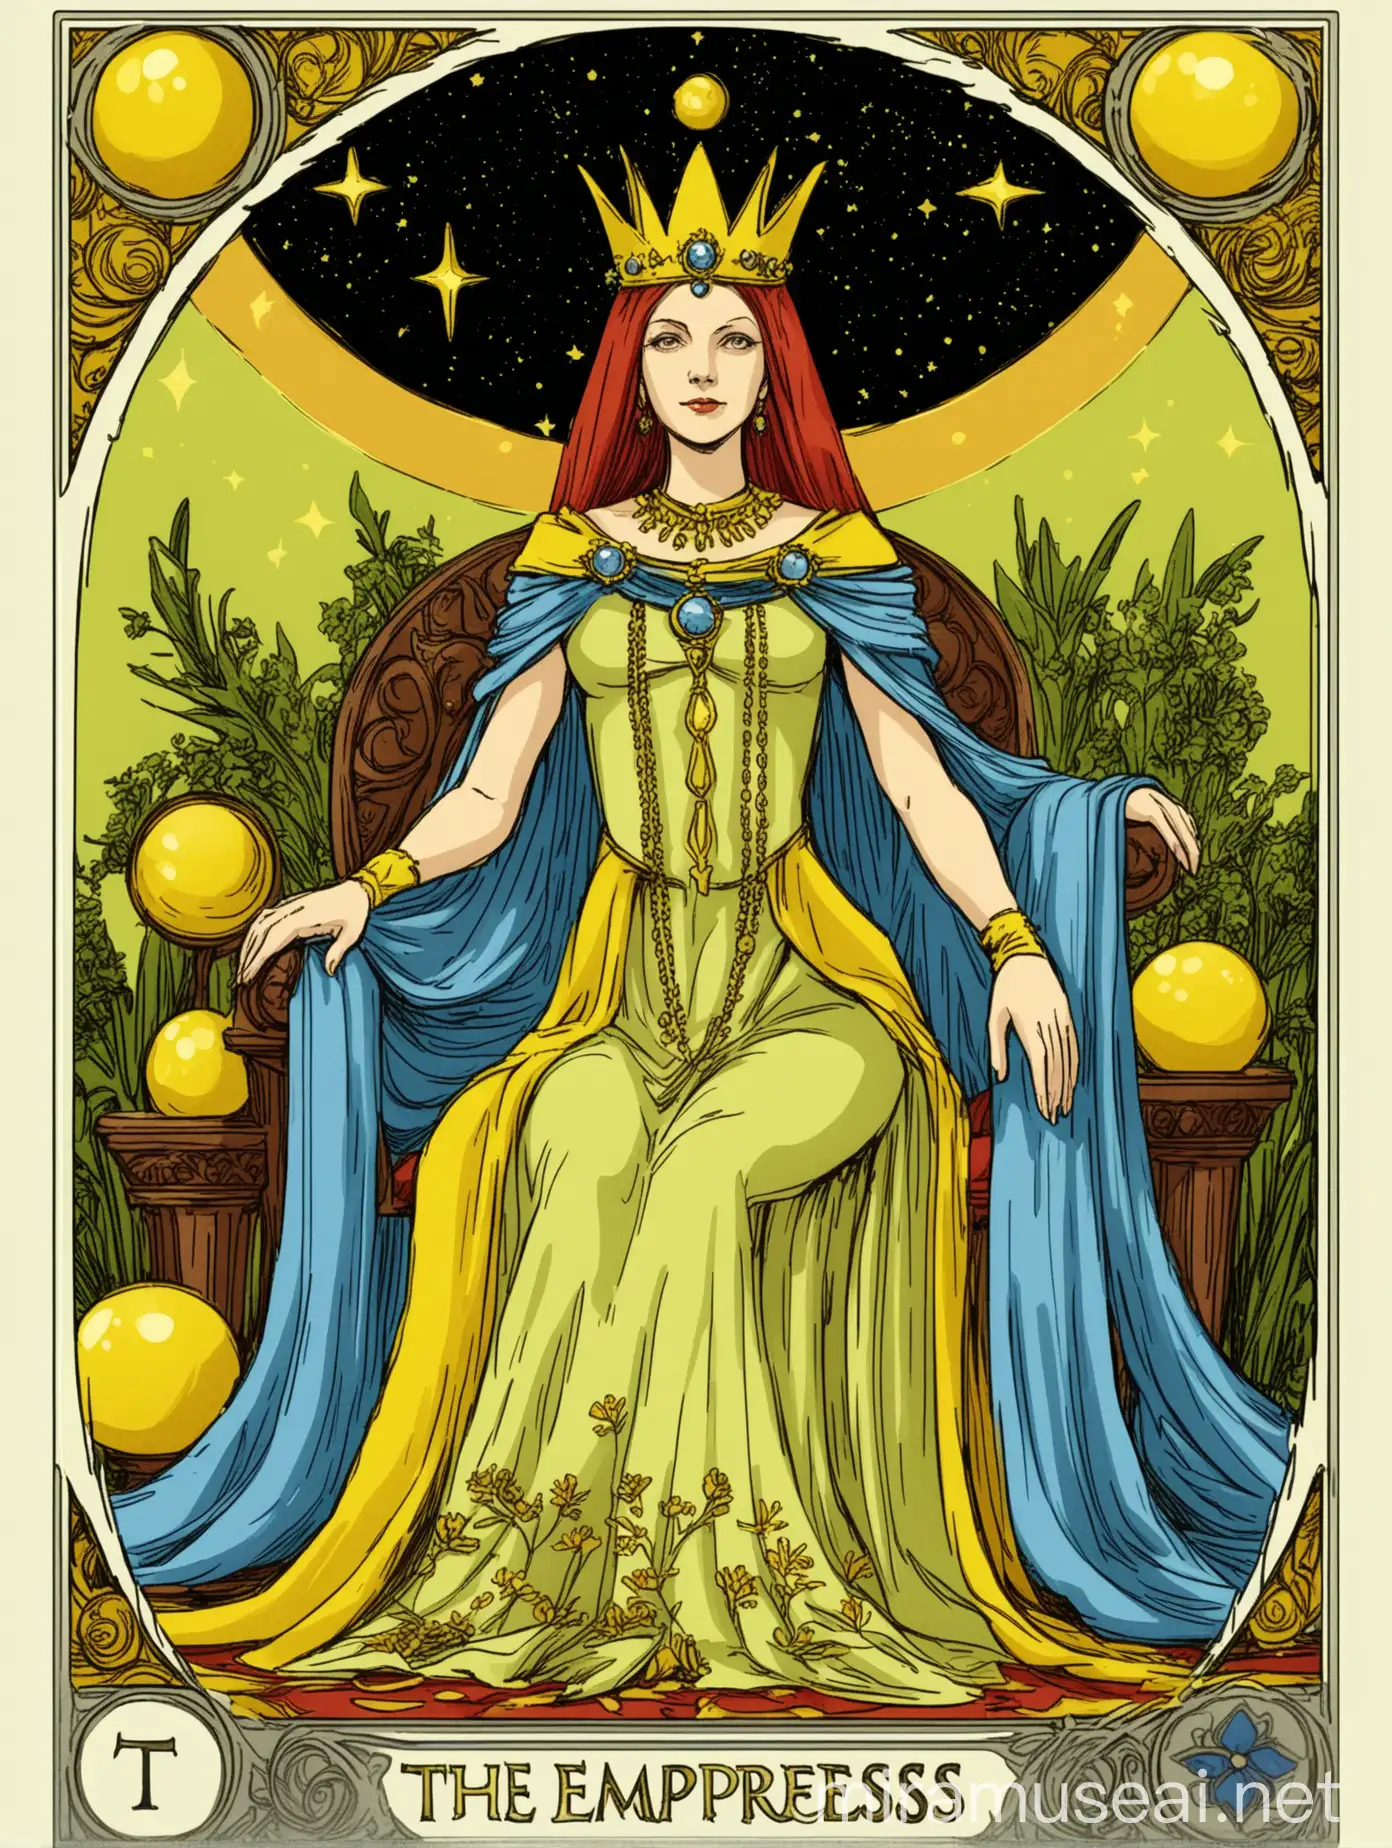 Empress Tarot Card with Floral Throne and Fertility Symbolism